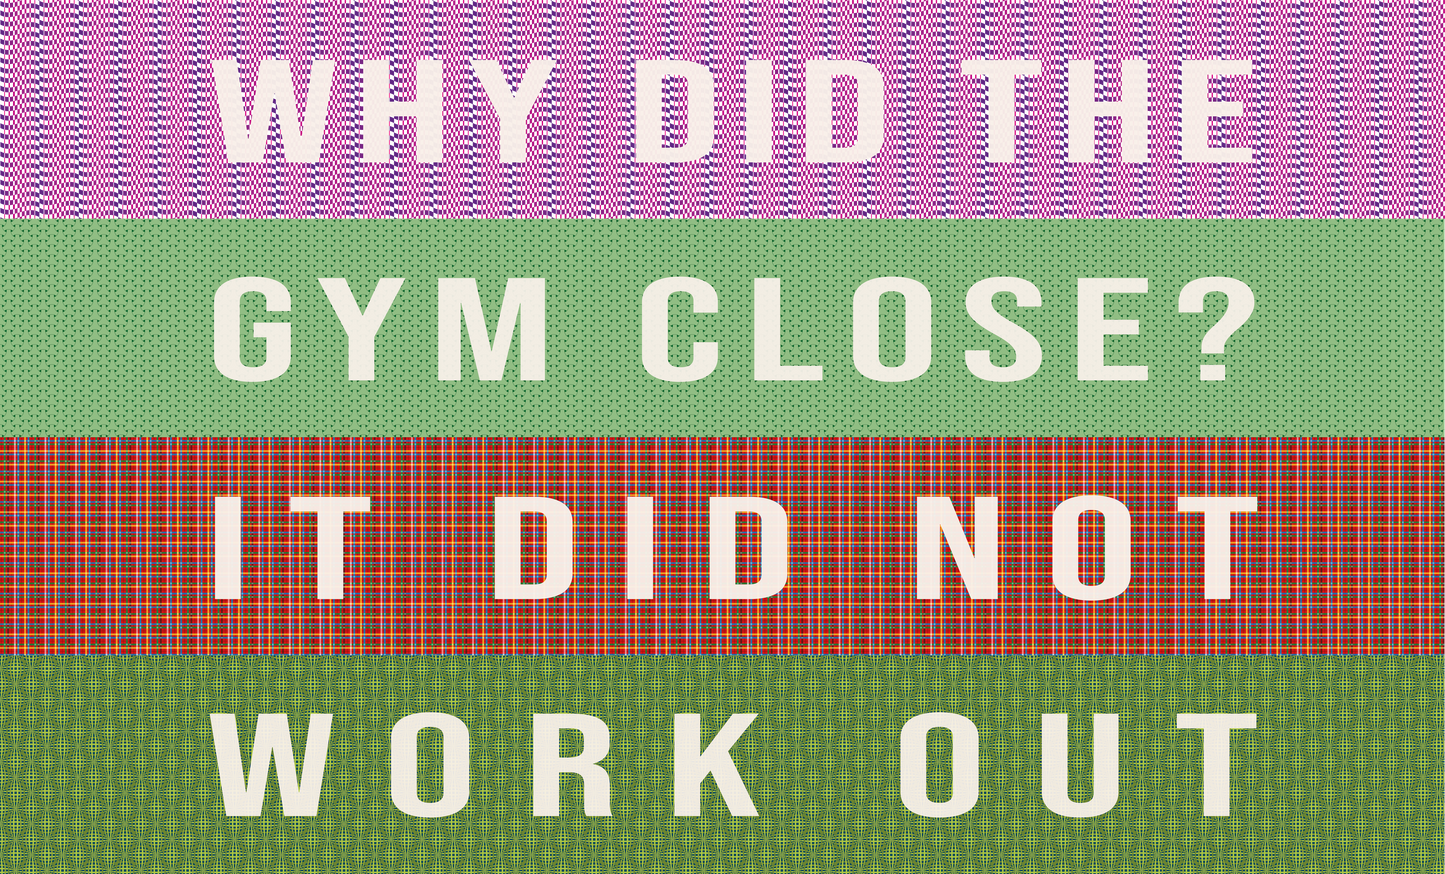 Door Mat 'Why did the gym close? It did not work out' - Posterify